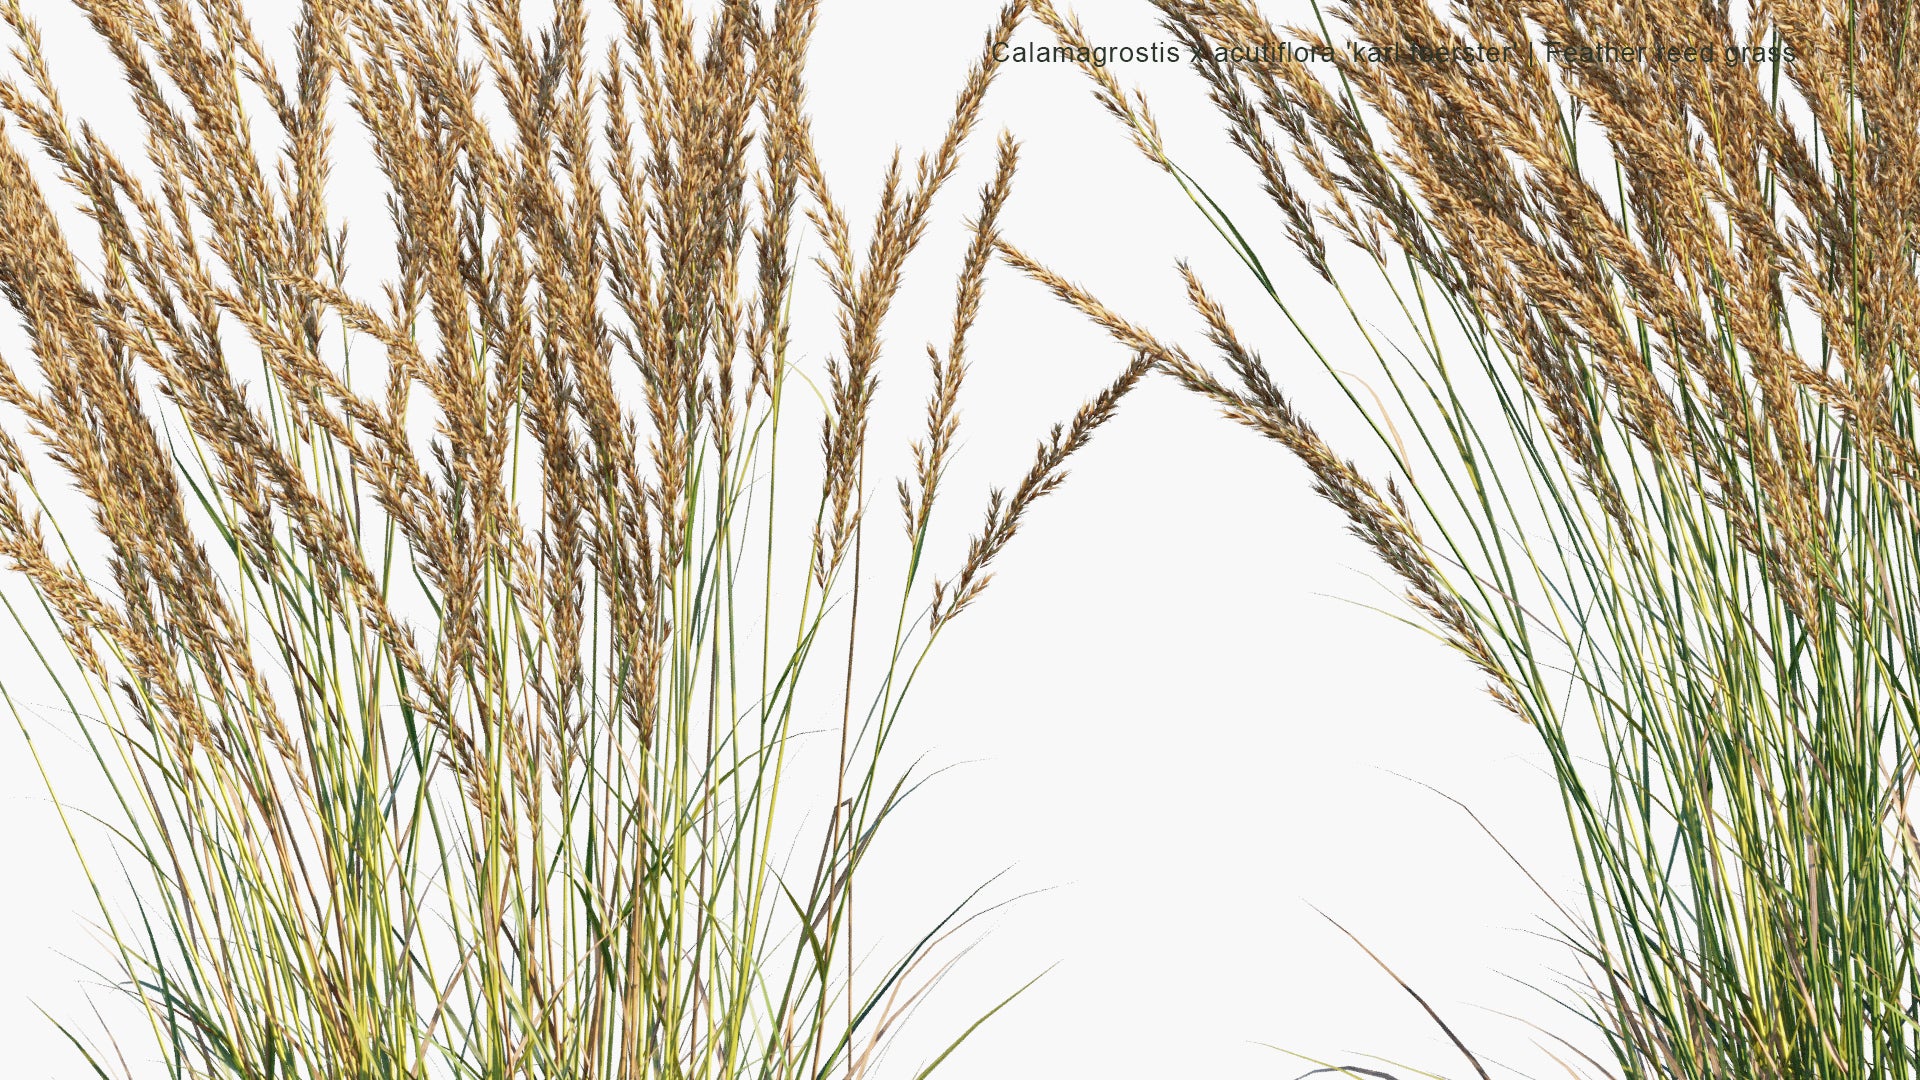 Low Poly Calamagrostis x Acutiflora 'Karl Foerster' - Feather Reed Grass (3D Model)